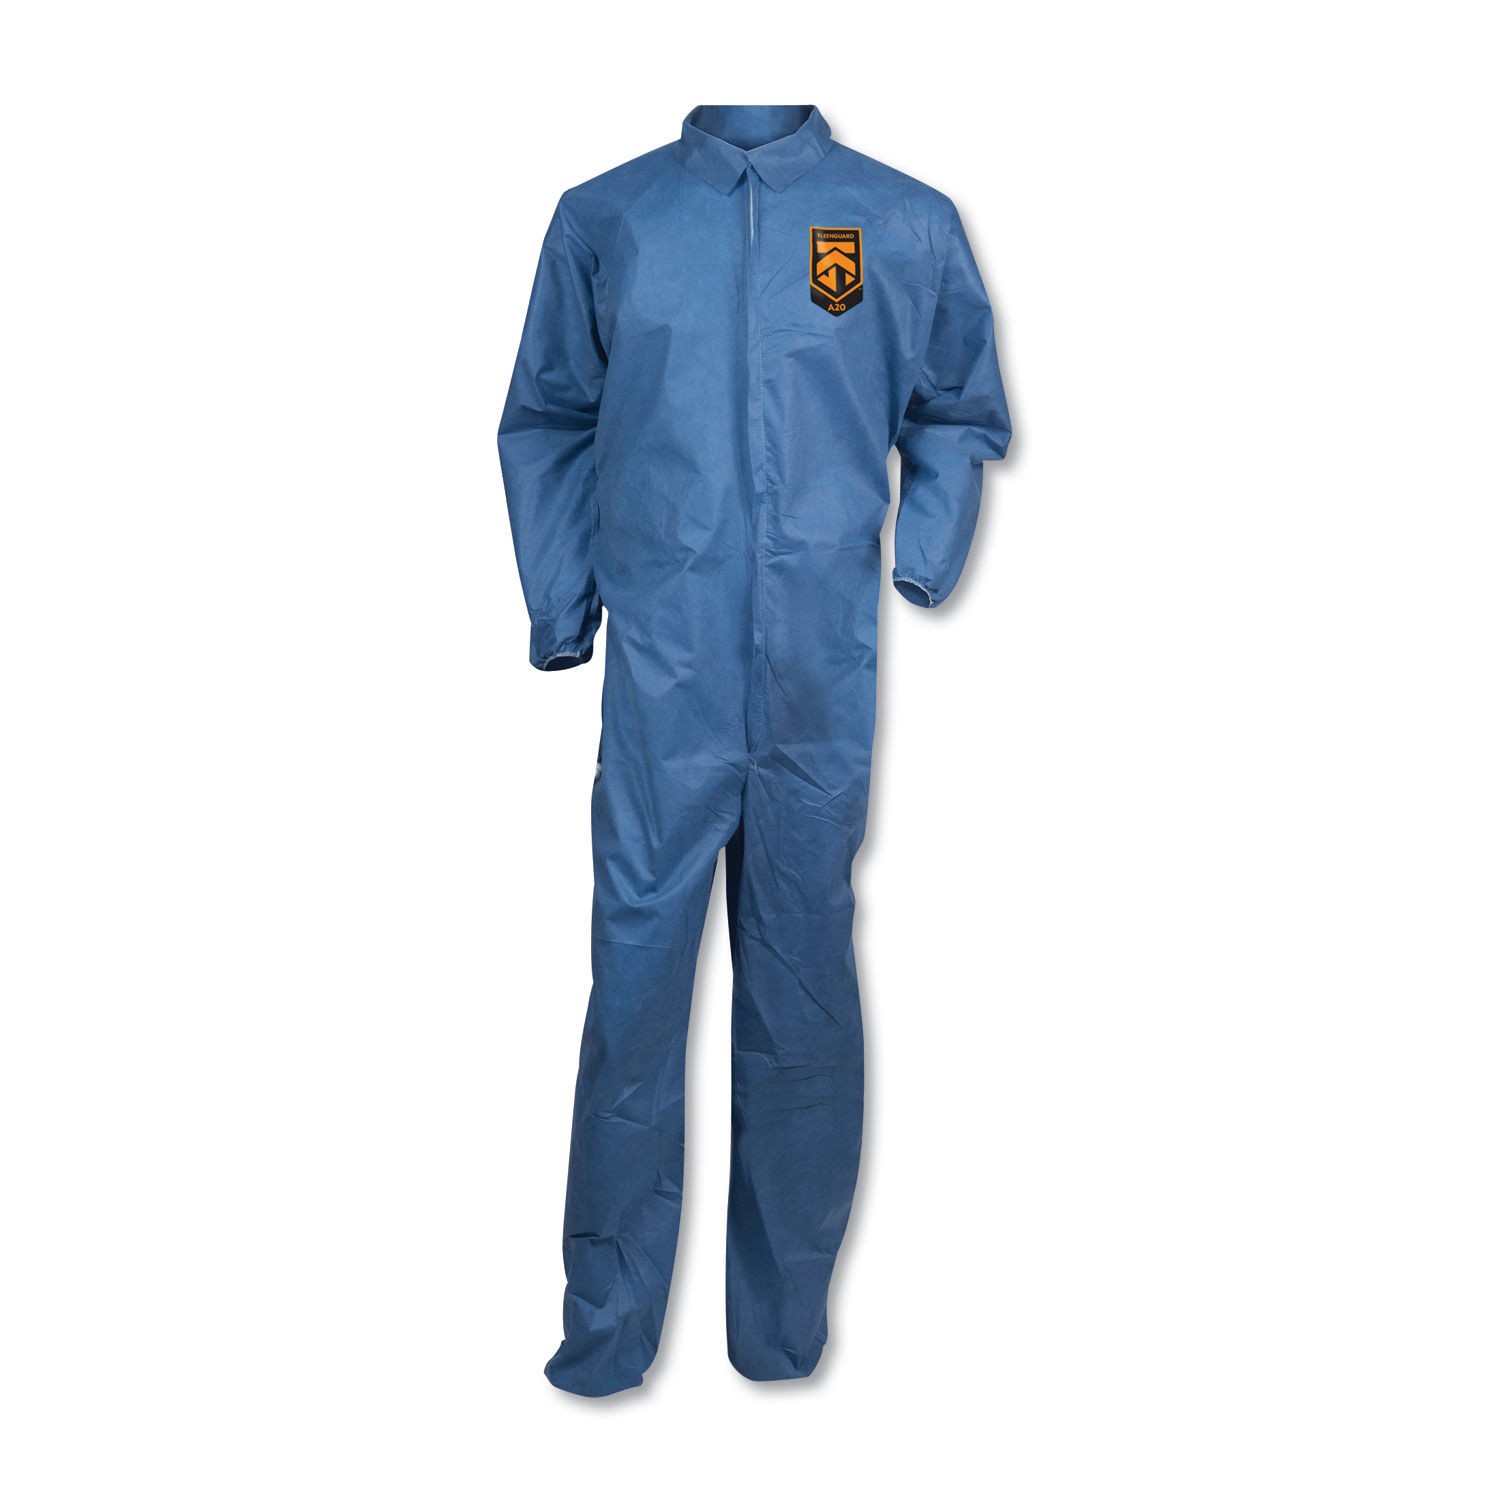 Kleenguard A20 Coveralls Microforce Barrier SMS Fabric, Blue, 2X-Large, 24/Carton